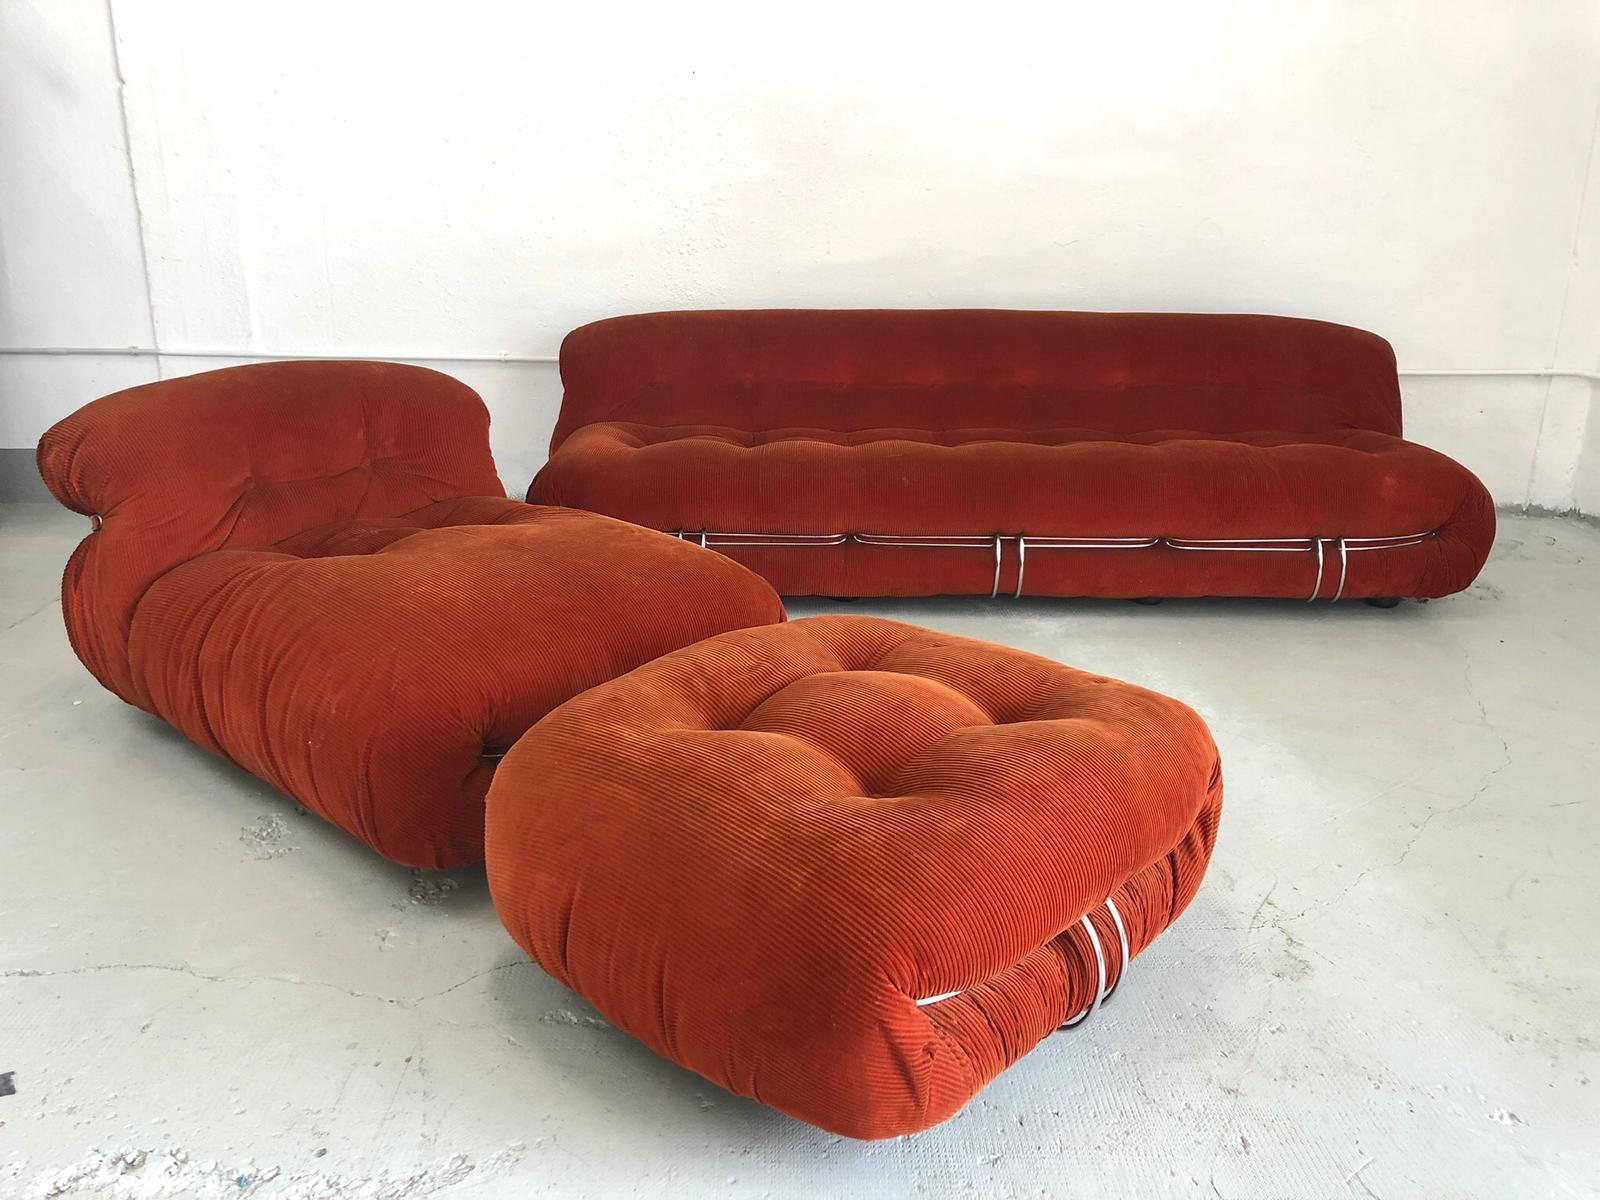 Soriana Chaise Lounge and ottoman design Tobia Scarpa for Cassina 1970s, with original corduroy orange fabric in good vintage condition, consistent with age and use. These items are currently being shipped from Italy, check with us for availability.